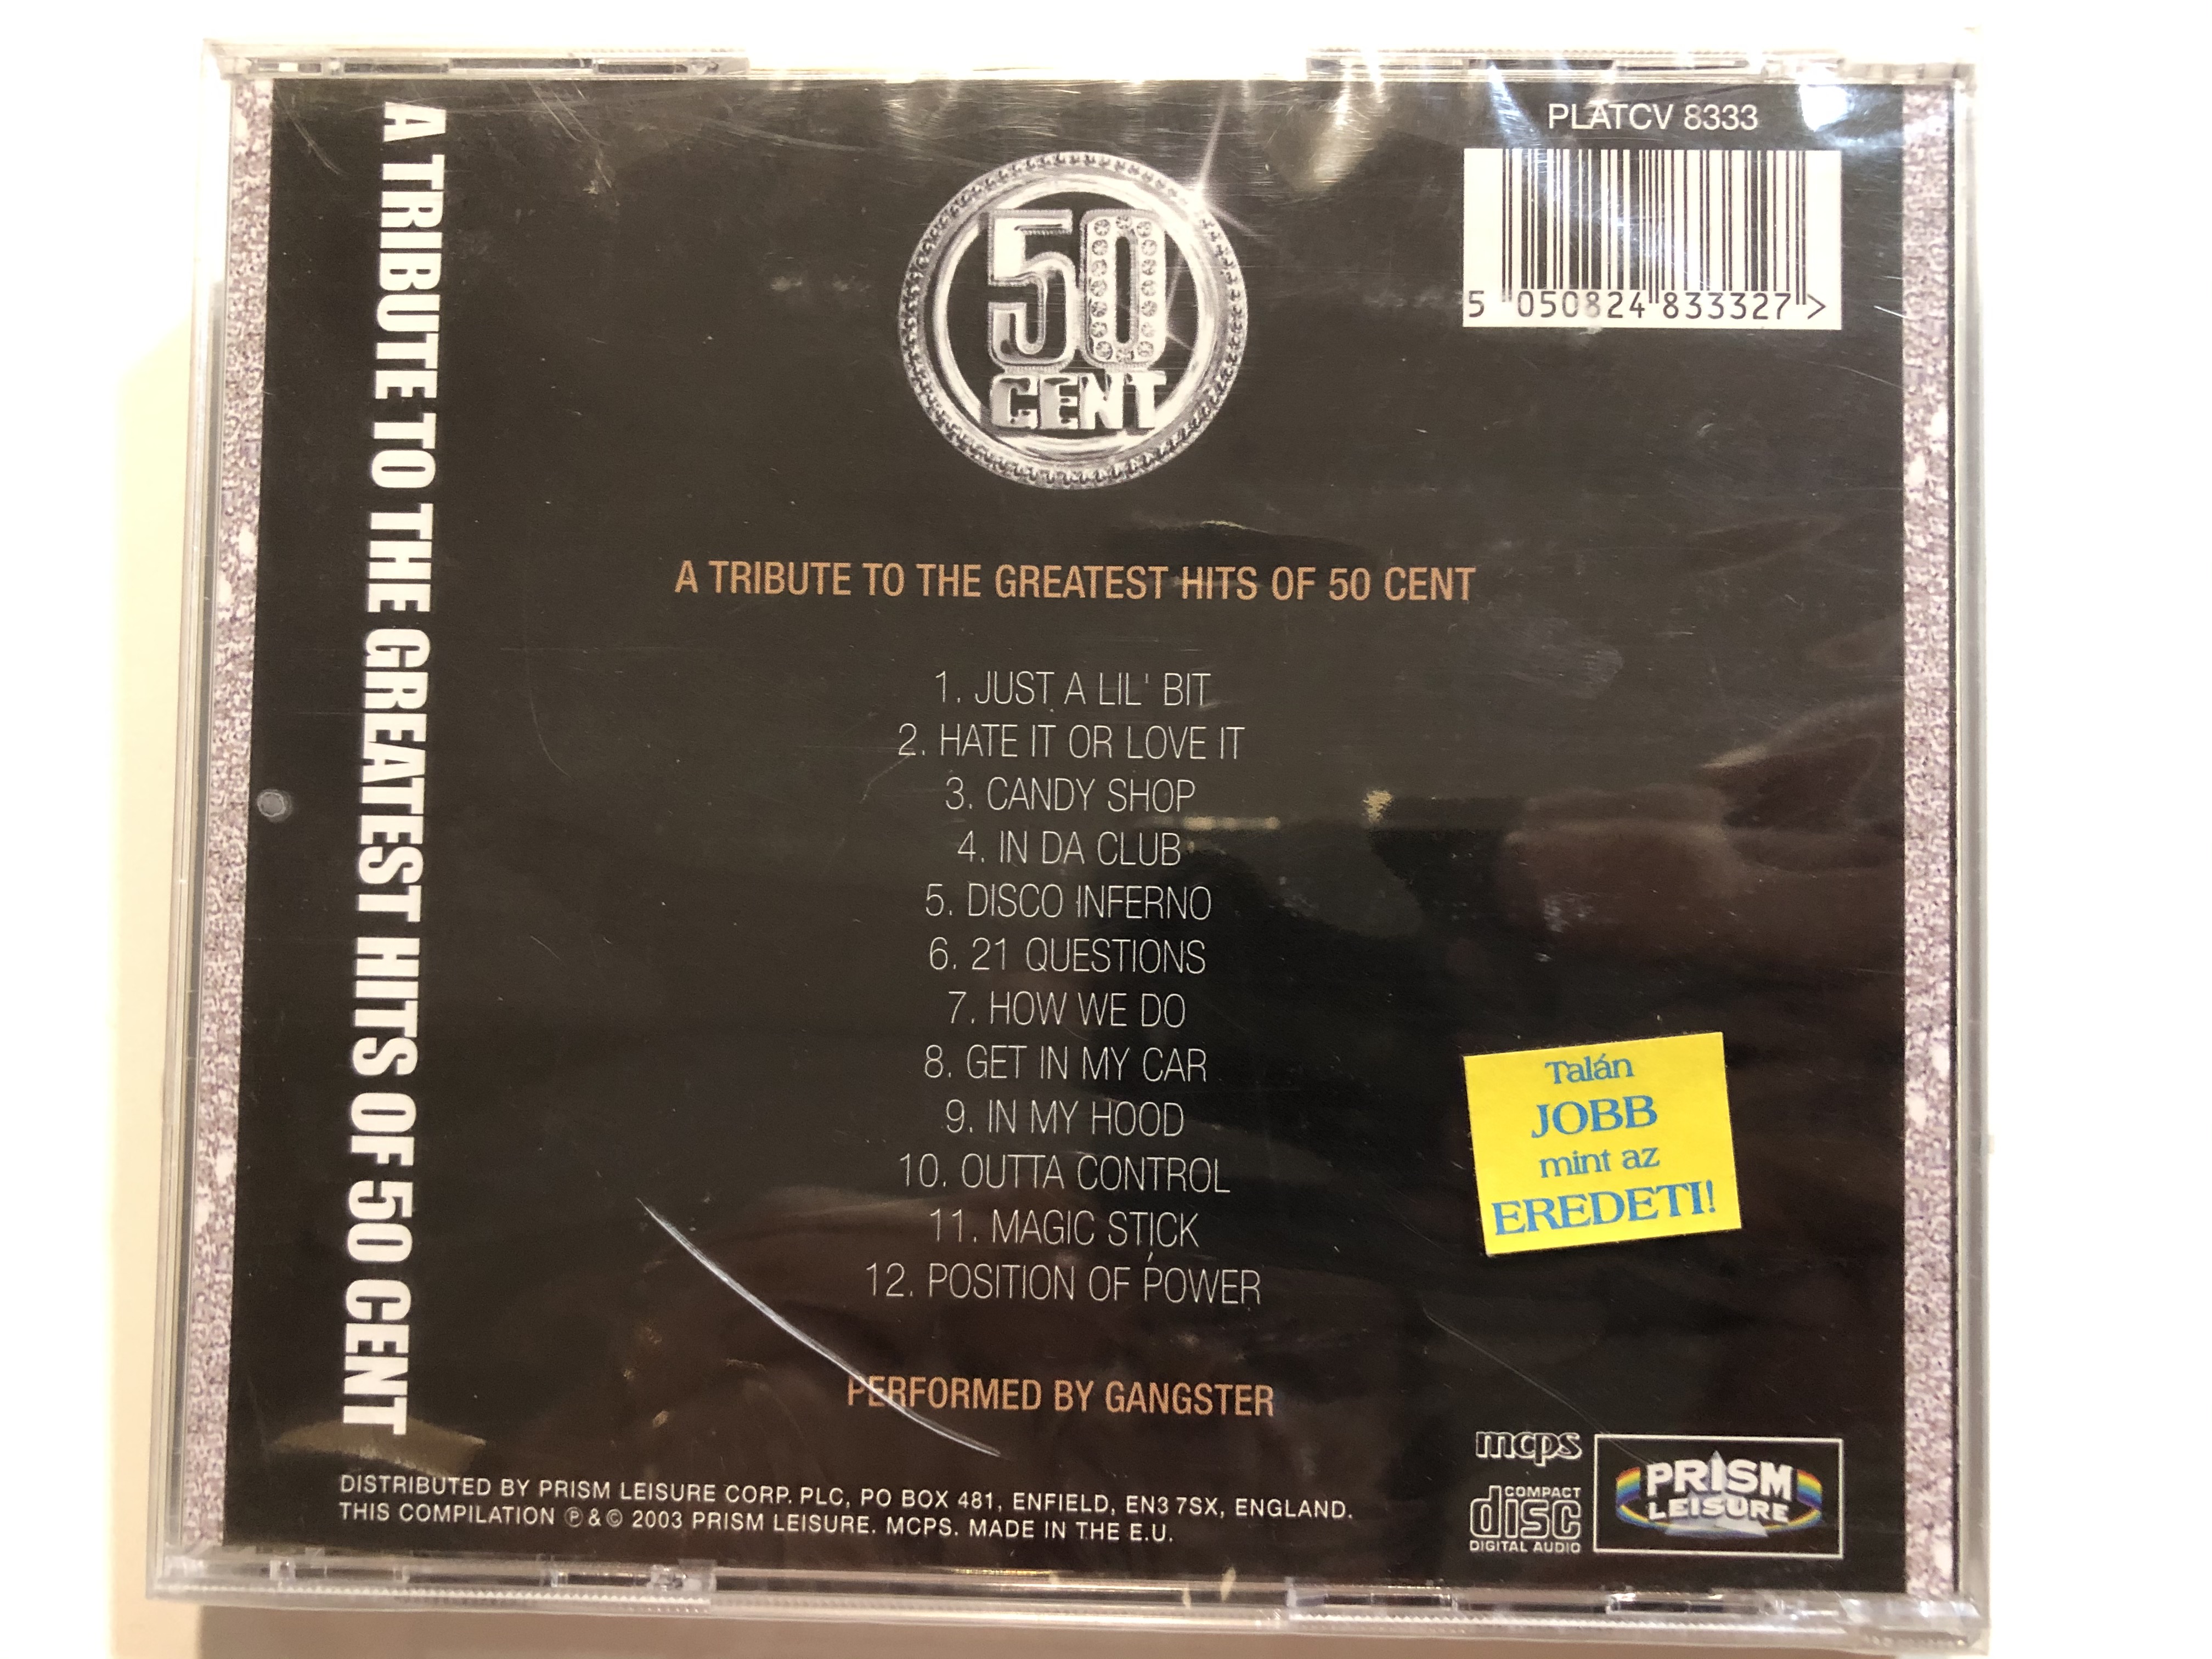 50-cent-a-tribute-to-the-greatest-hits-of-50-cent-performed-by-gangster-including-in-da-club-21-questions-p.i.m.p.-prism-leisure-audio-cd-2003-platcv-8333-2-.jpg